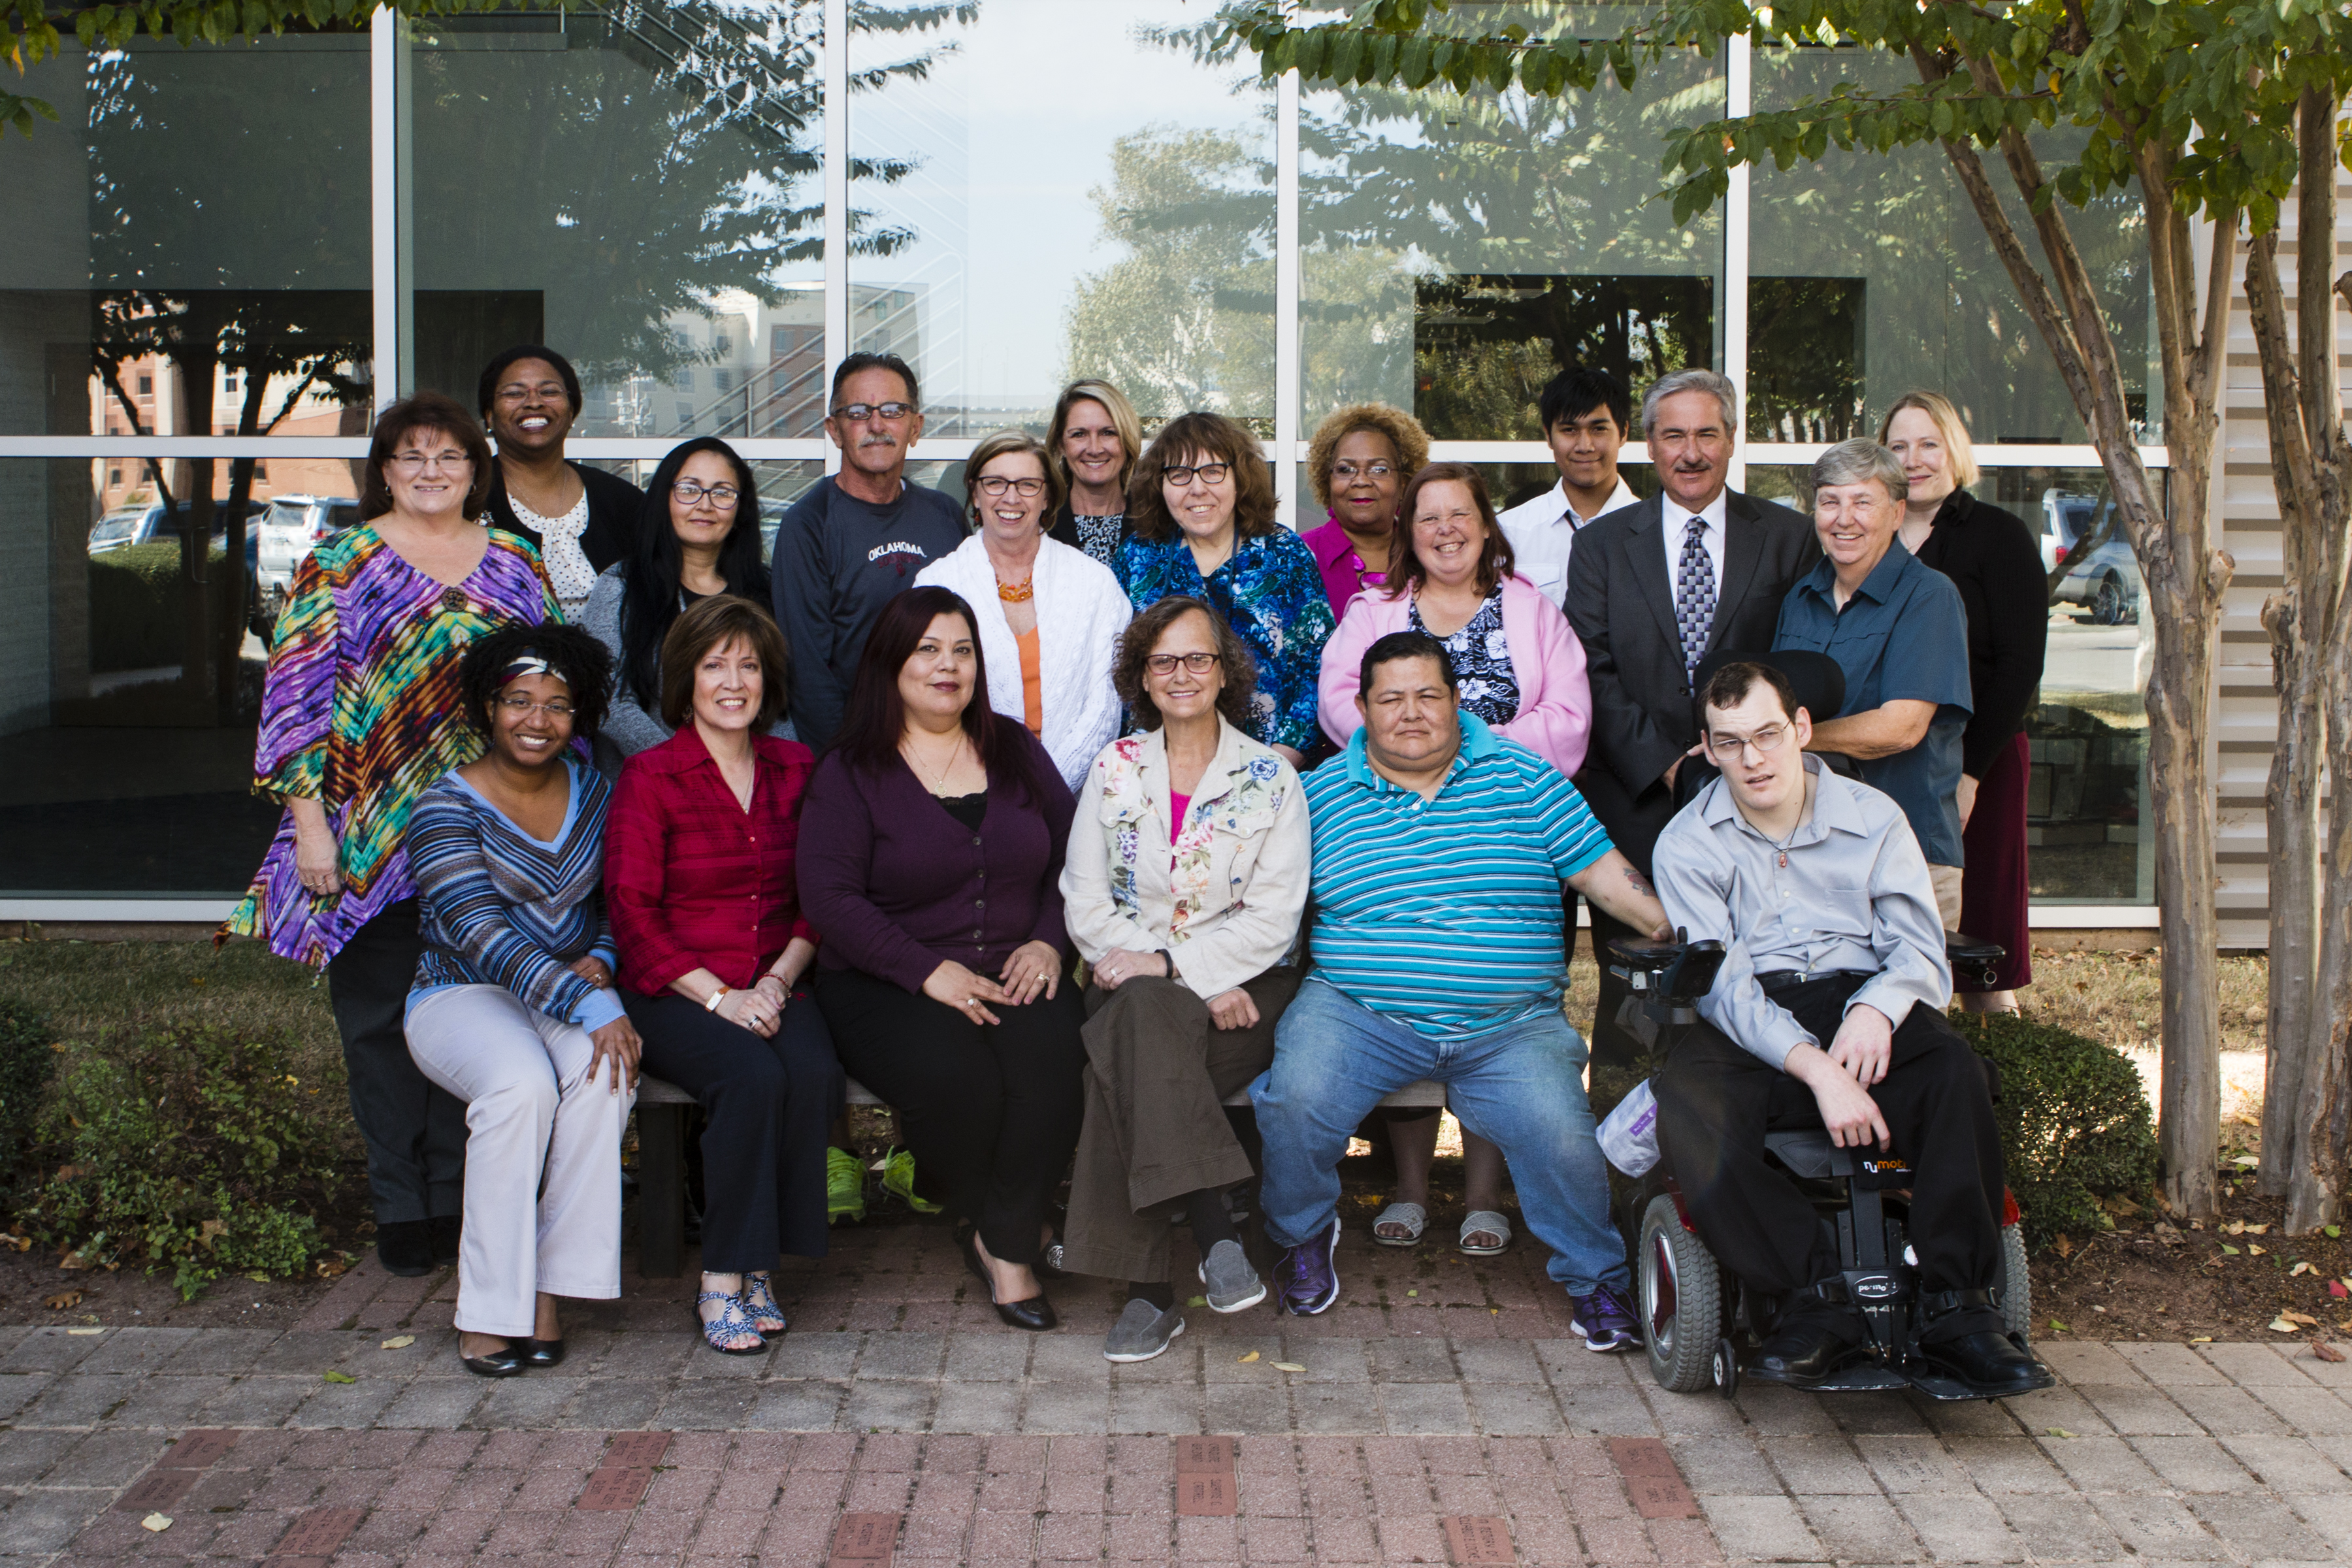 CLL/UCEDD Consumer Advisory Committee: A diverse group of multi-generational women and men.